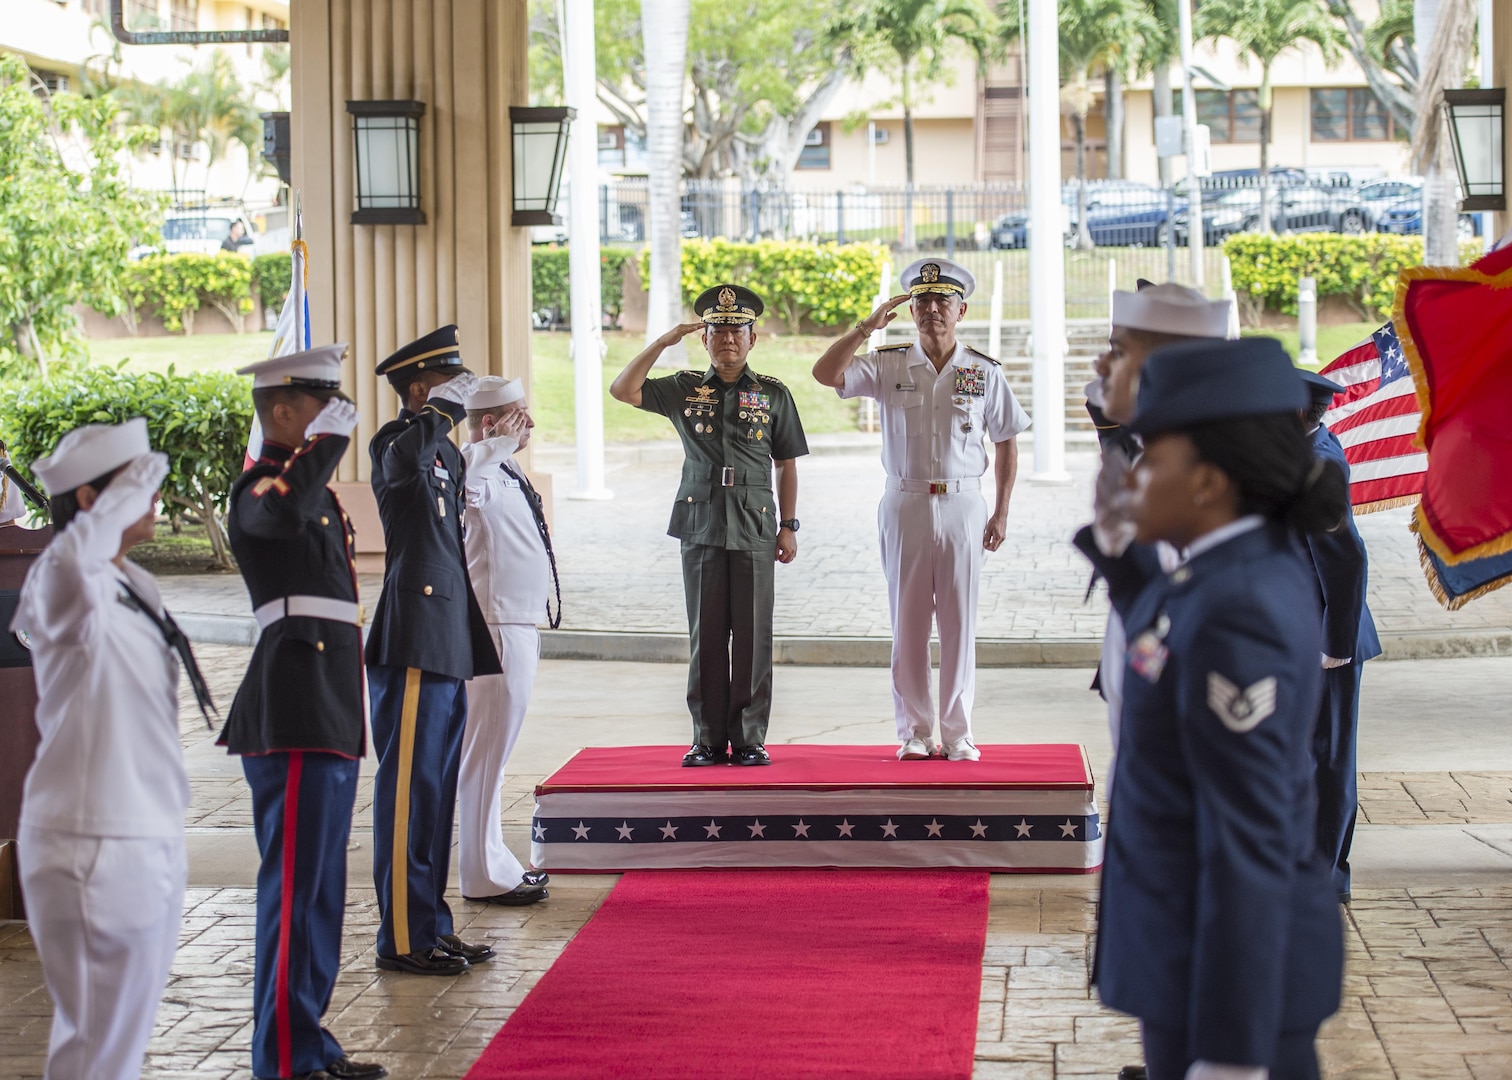 CAMP H.M. SMITH, Hawaii (Sept. 28, 2018) — Adm. Harry Harris, Commander of U.S. Pacific Command (PACOM), and Gen. Eduardo Año, Chief of Staff for the Armed Forces of the Philippines, are welcomed at PACOM headquarters during an honors ceremony. During Año’s two-day visit to PACOM, he and Harris will meet to discuss changes to the Mutual Defense Board and Security Engagement Board. The Mutual Defense Board provides direct liaison and consultation on military matters of mutual concern to develop and improve both countries’ common defense. The Security Engagement Board provides the framework and mechanism for continuing liaison and consultation on non-traditional threats to security such as terrorism, transnational crimes, maritime security, and natural and man-made disasters. (U.S. Navy photo by Mass Communication Specialist 2nd Class James Mullen/Released)